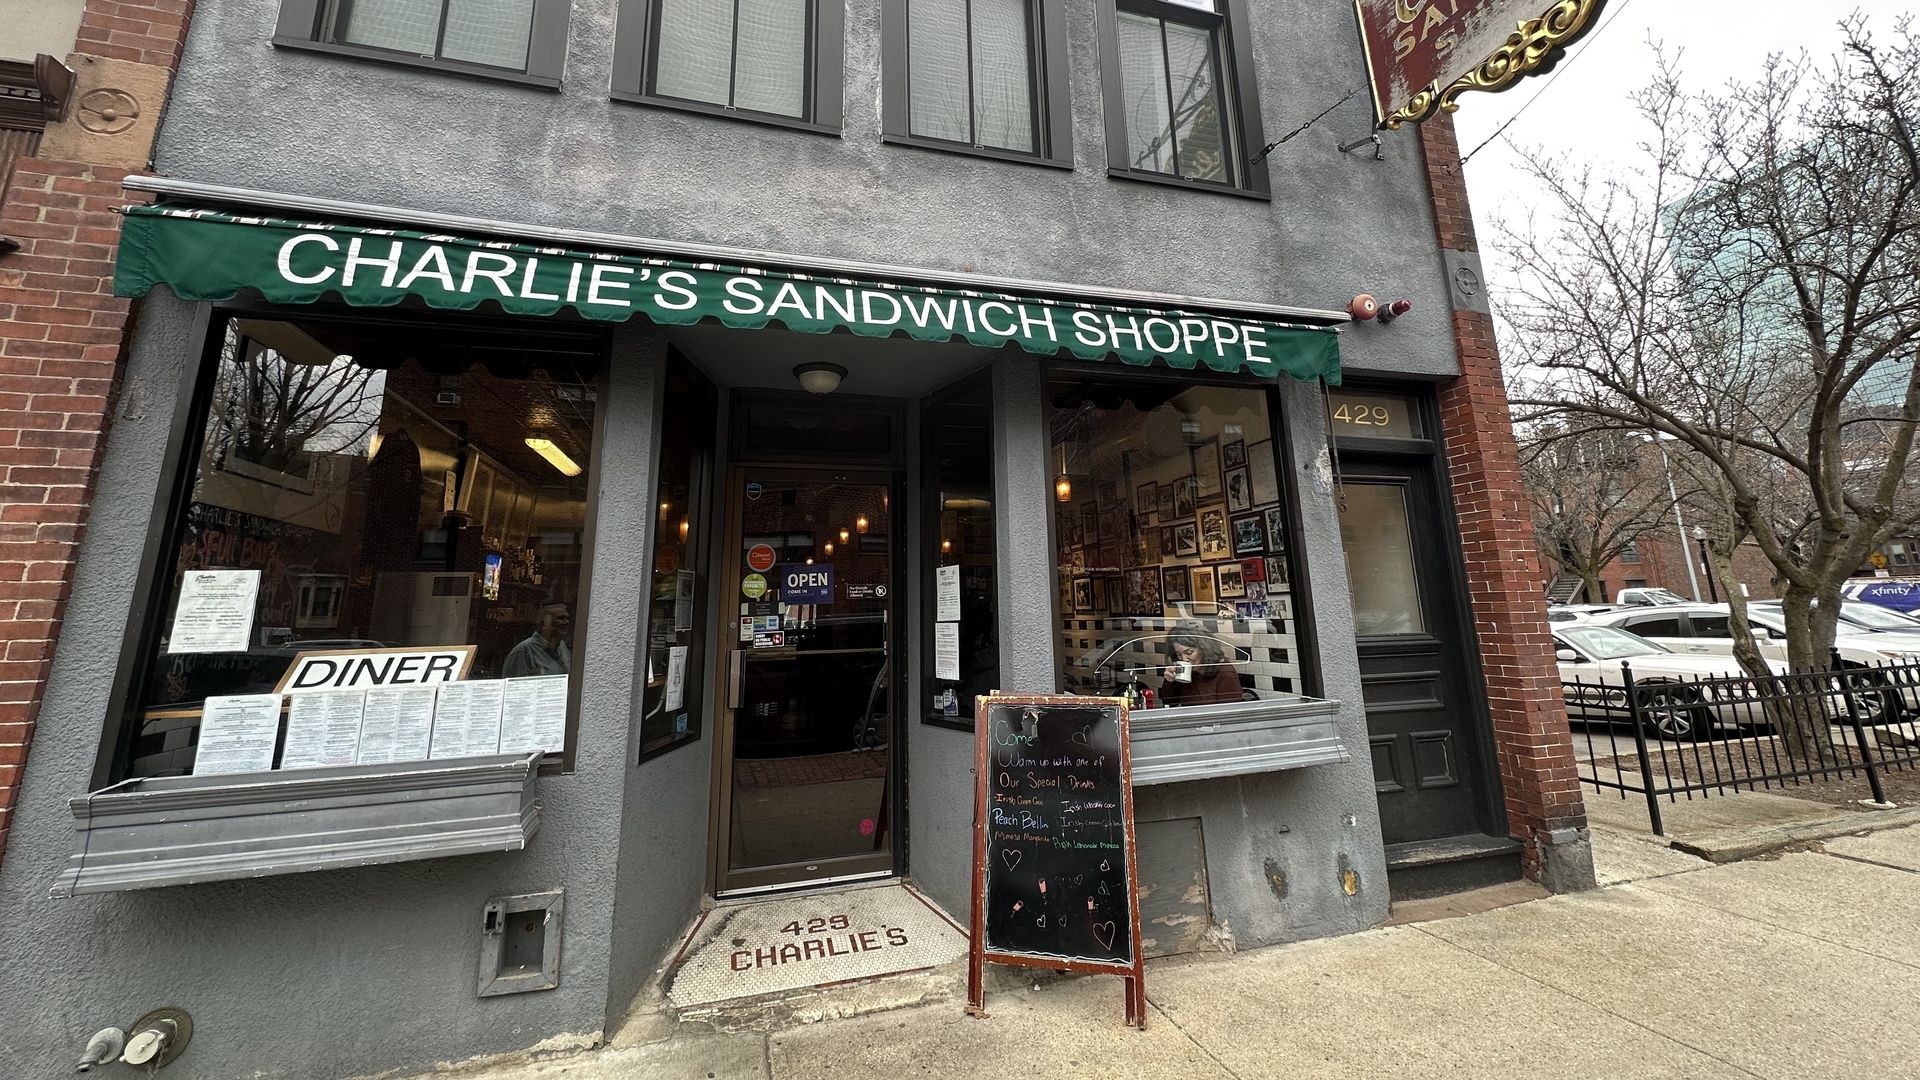 The front of Charlie's Sandwich Shoppe in the daytime gives you a clear view of the red sign and the green banner at the entrance.